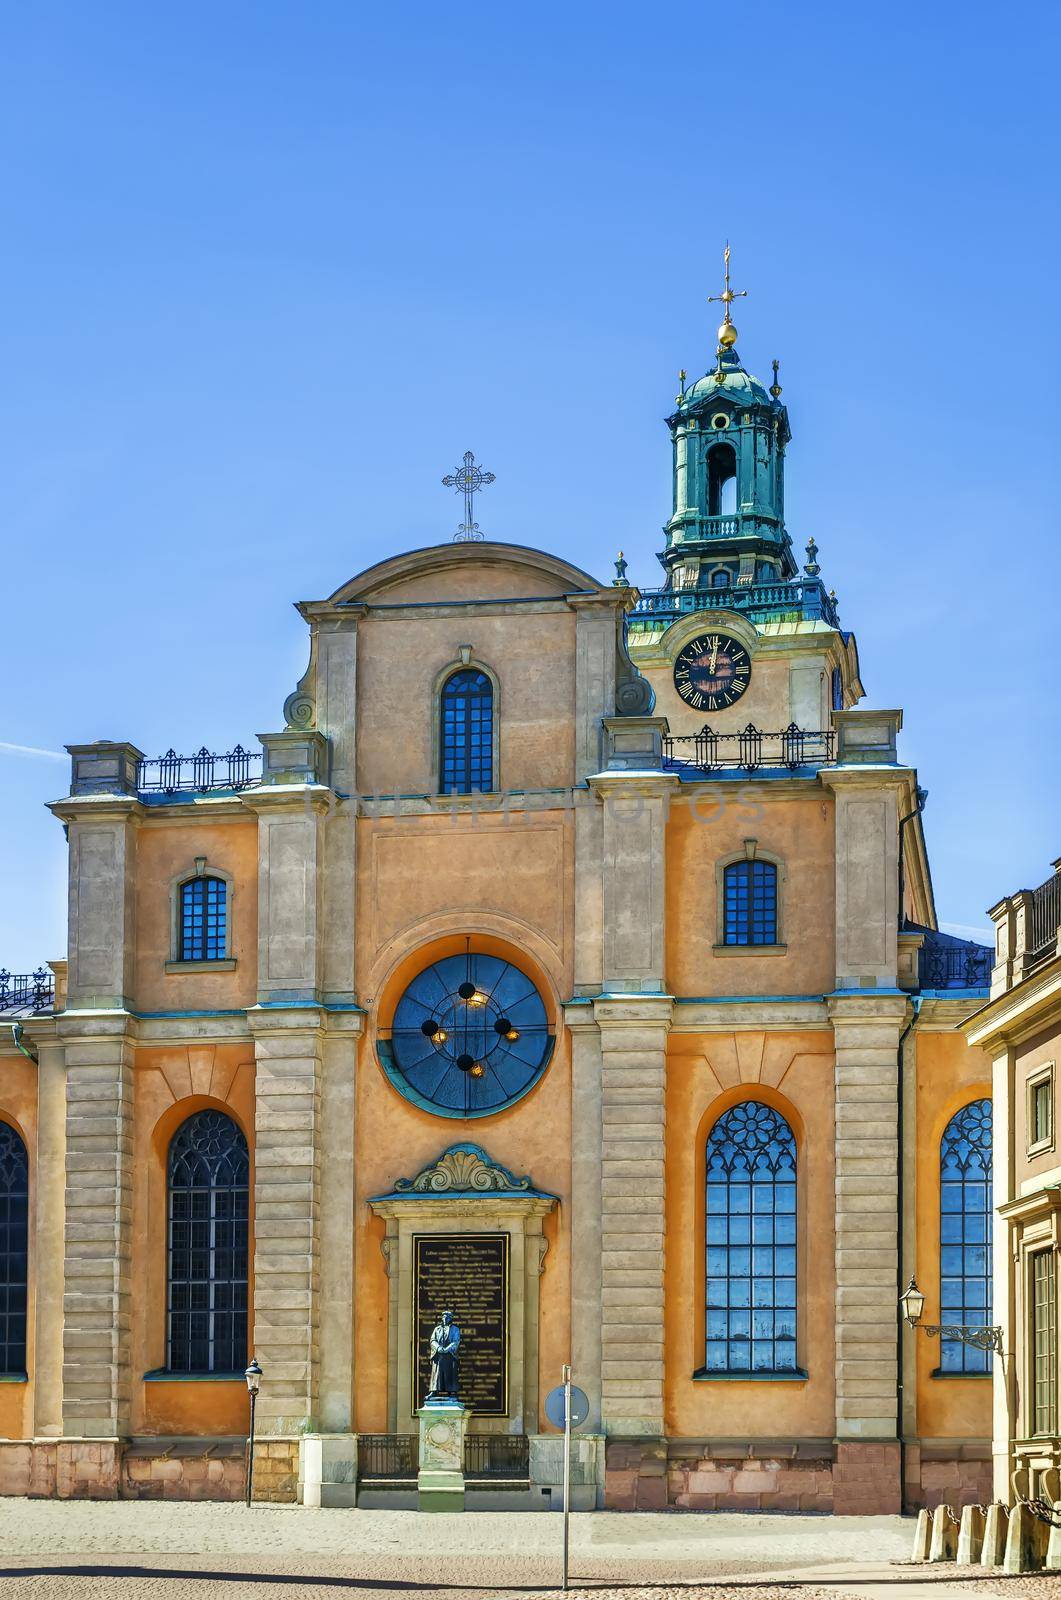 Church of St. Nicholas is the oldest church in Gamla Stan, the old town in central Stockholm, Sweden